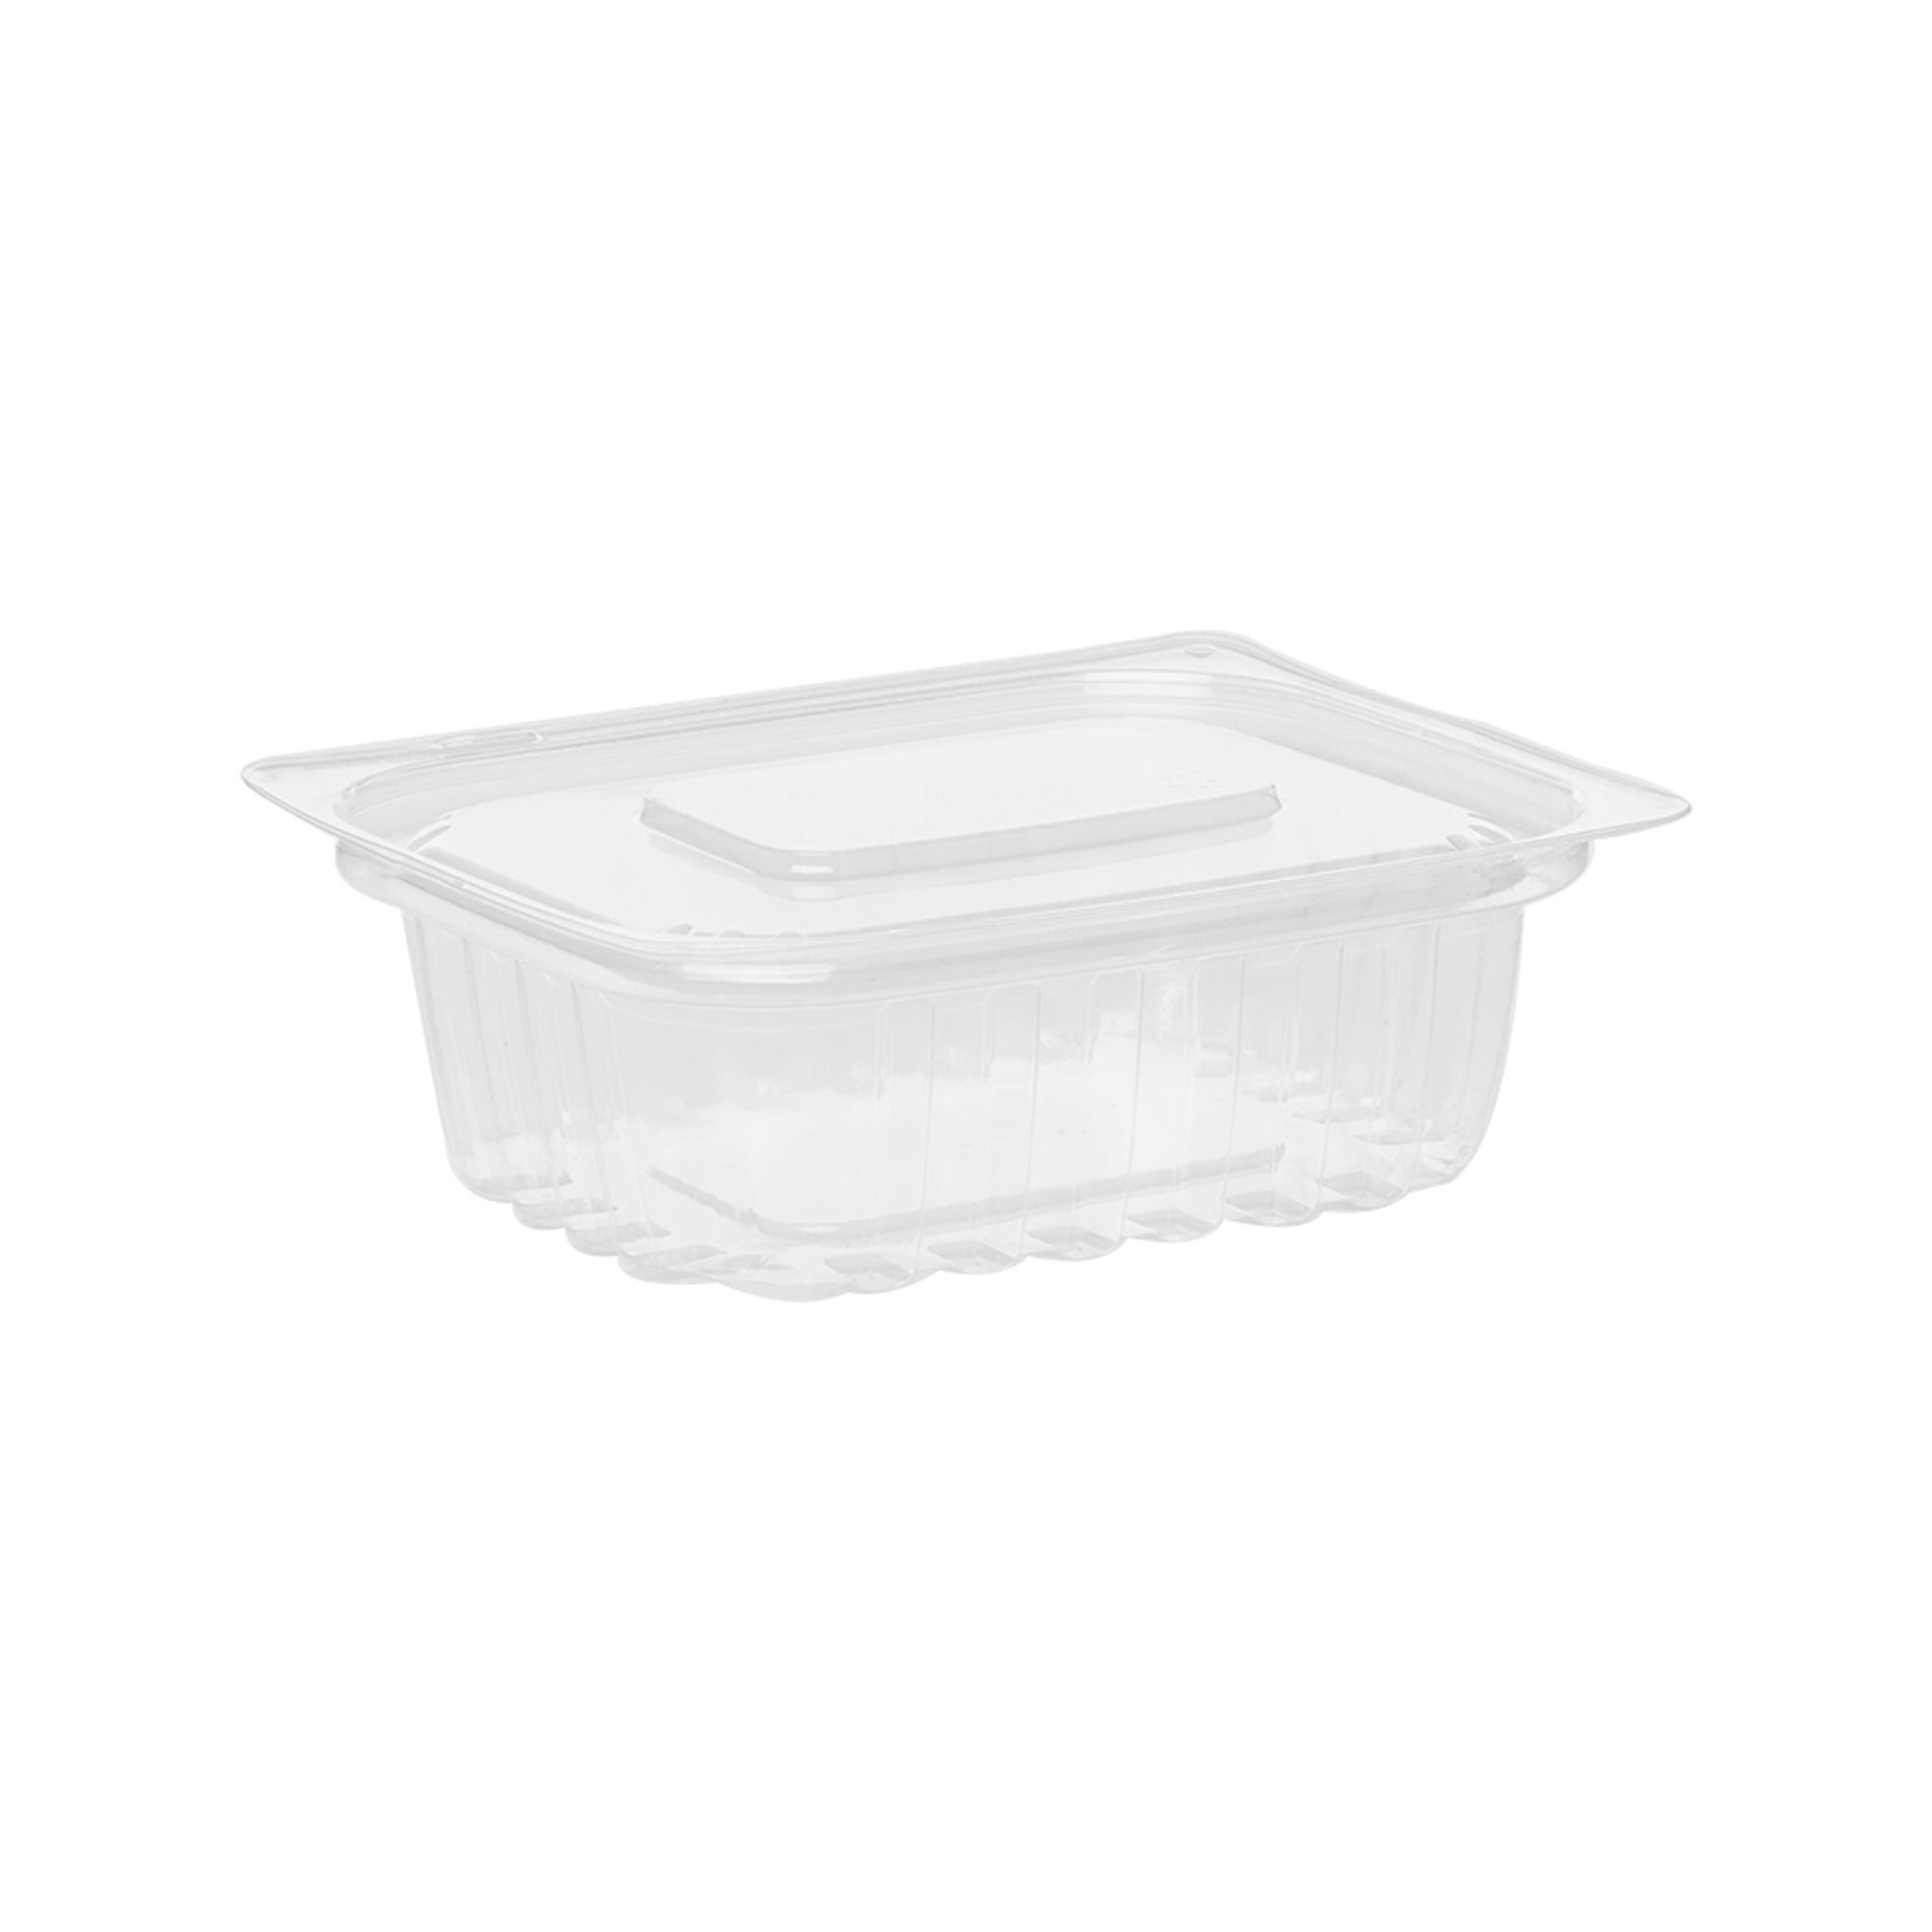 Crystal Clear Cont. 12 Oz + Lid 500 Sets - Hotpack Bahrain